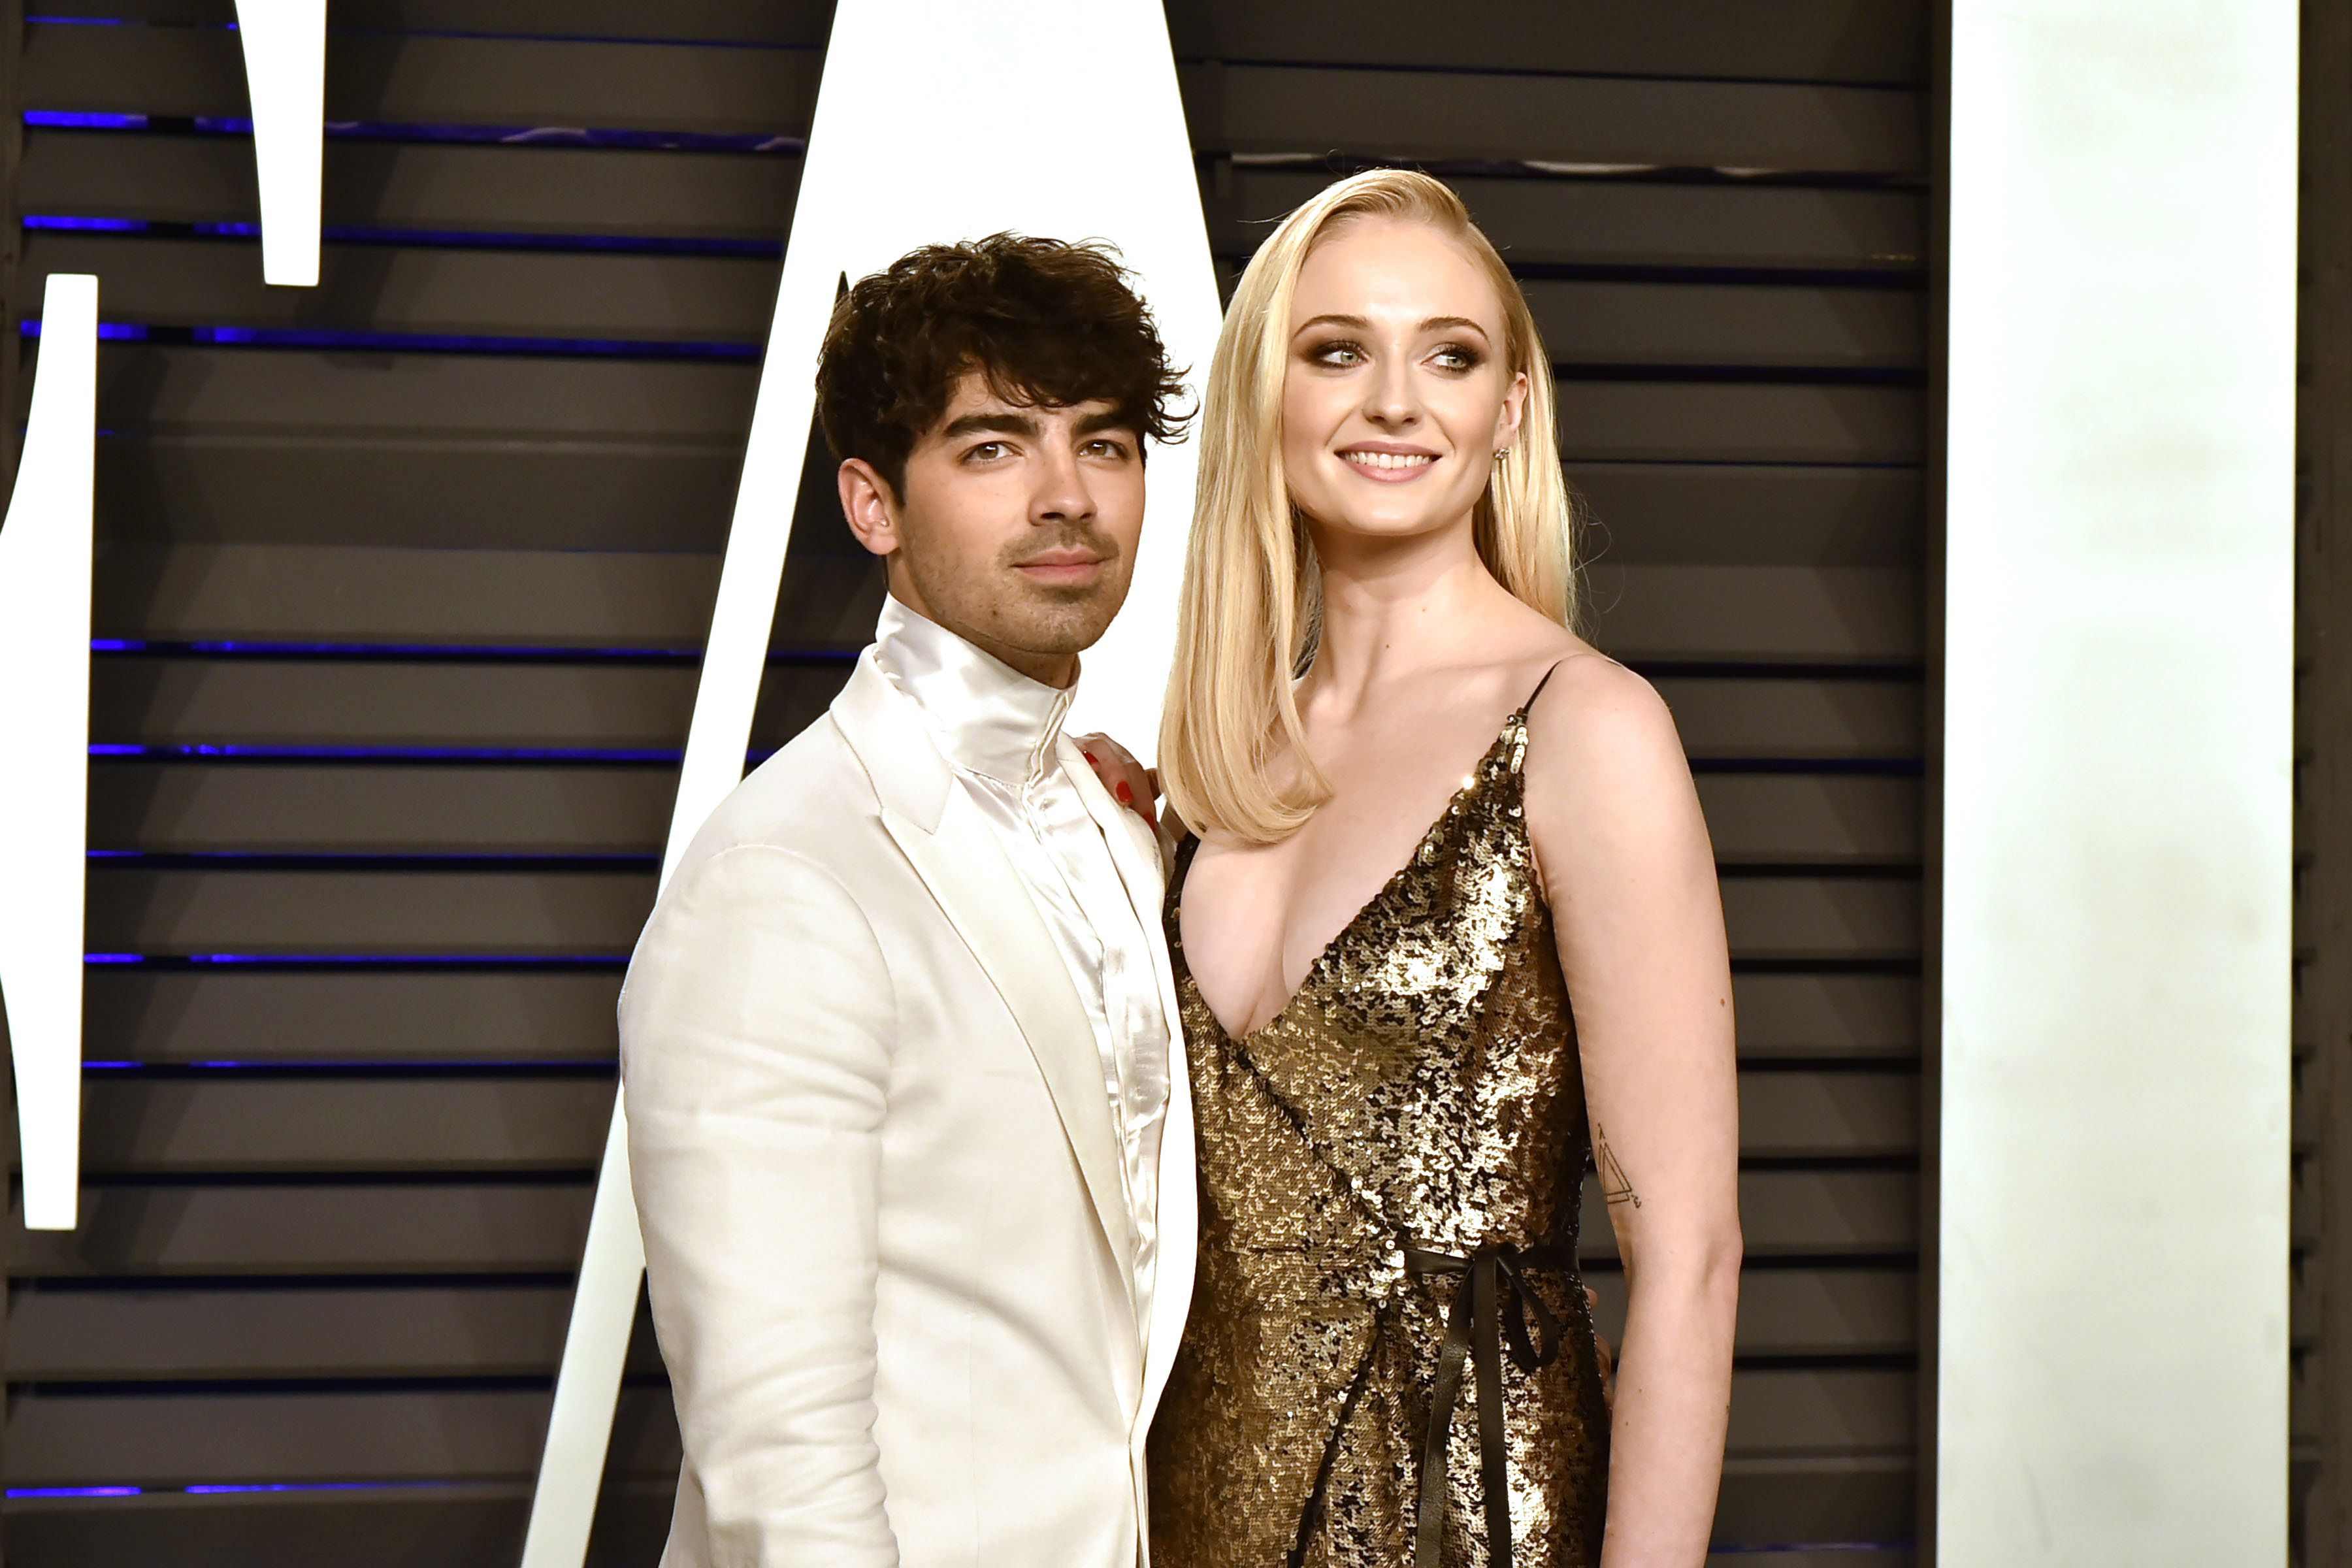 'GOT' star Sophie Turner shares UNSEEN lovey-dovey pics on 2nd wedding anniversary! Check out